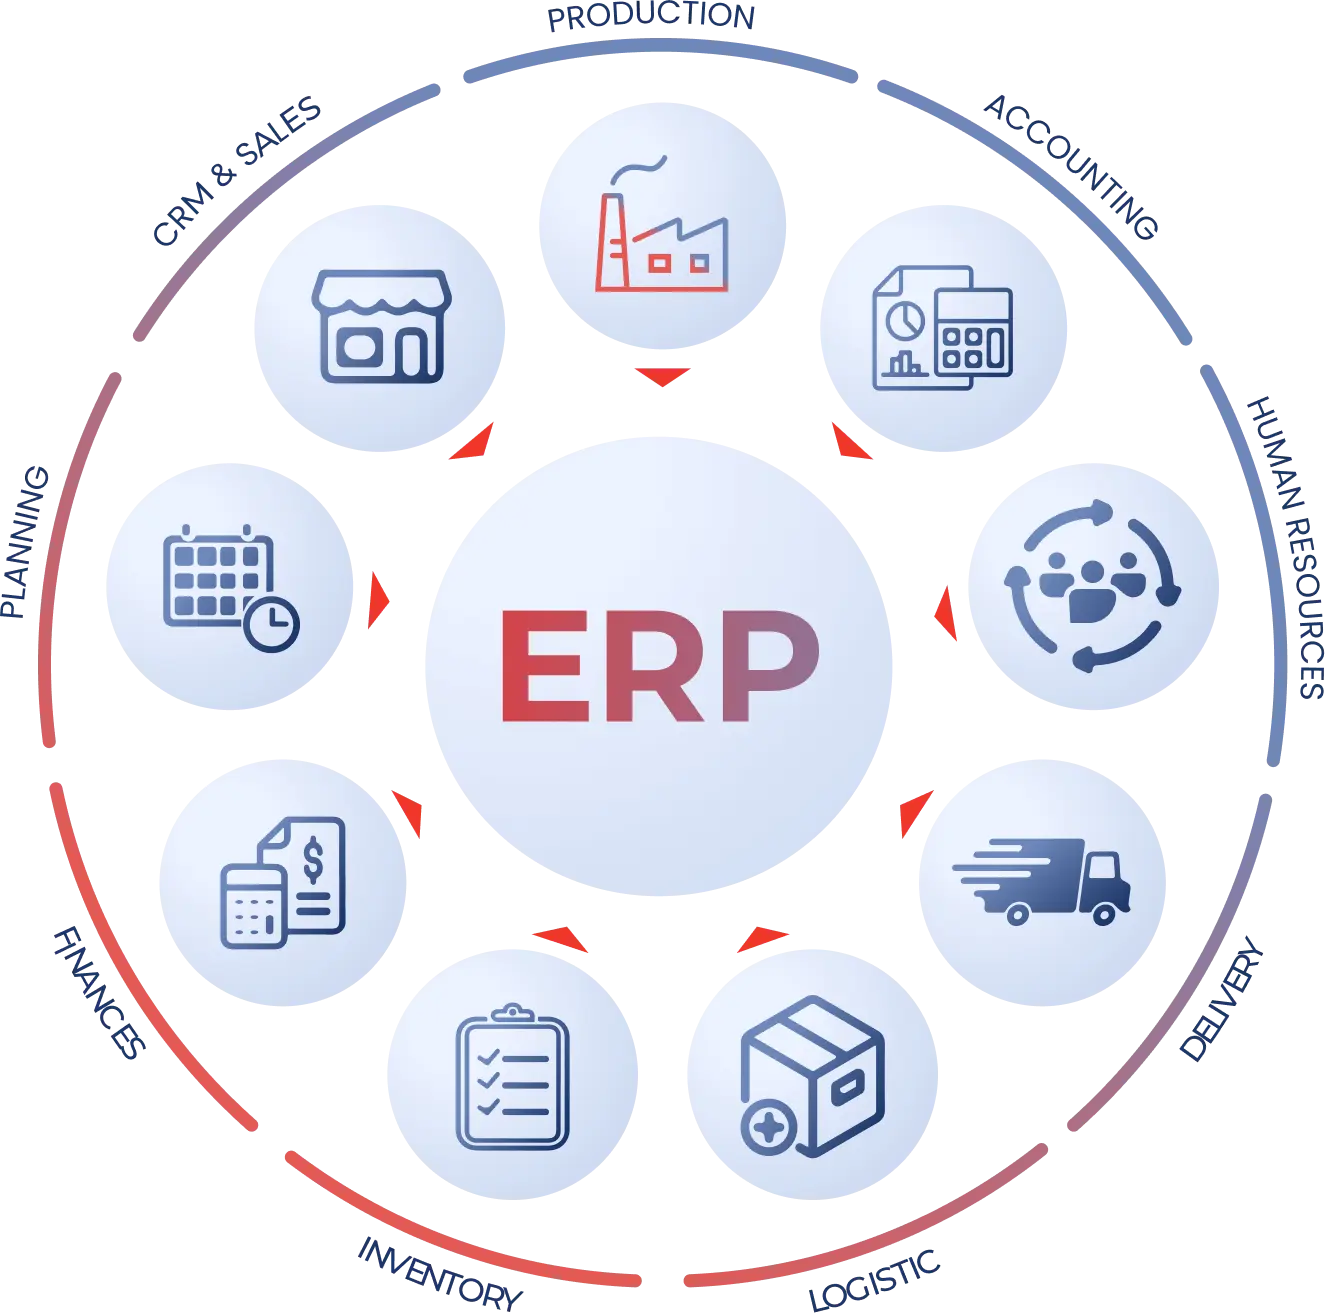 a visualization of an ERP as a wheel having sections which include all essential business operations in one place